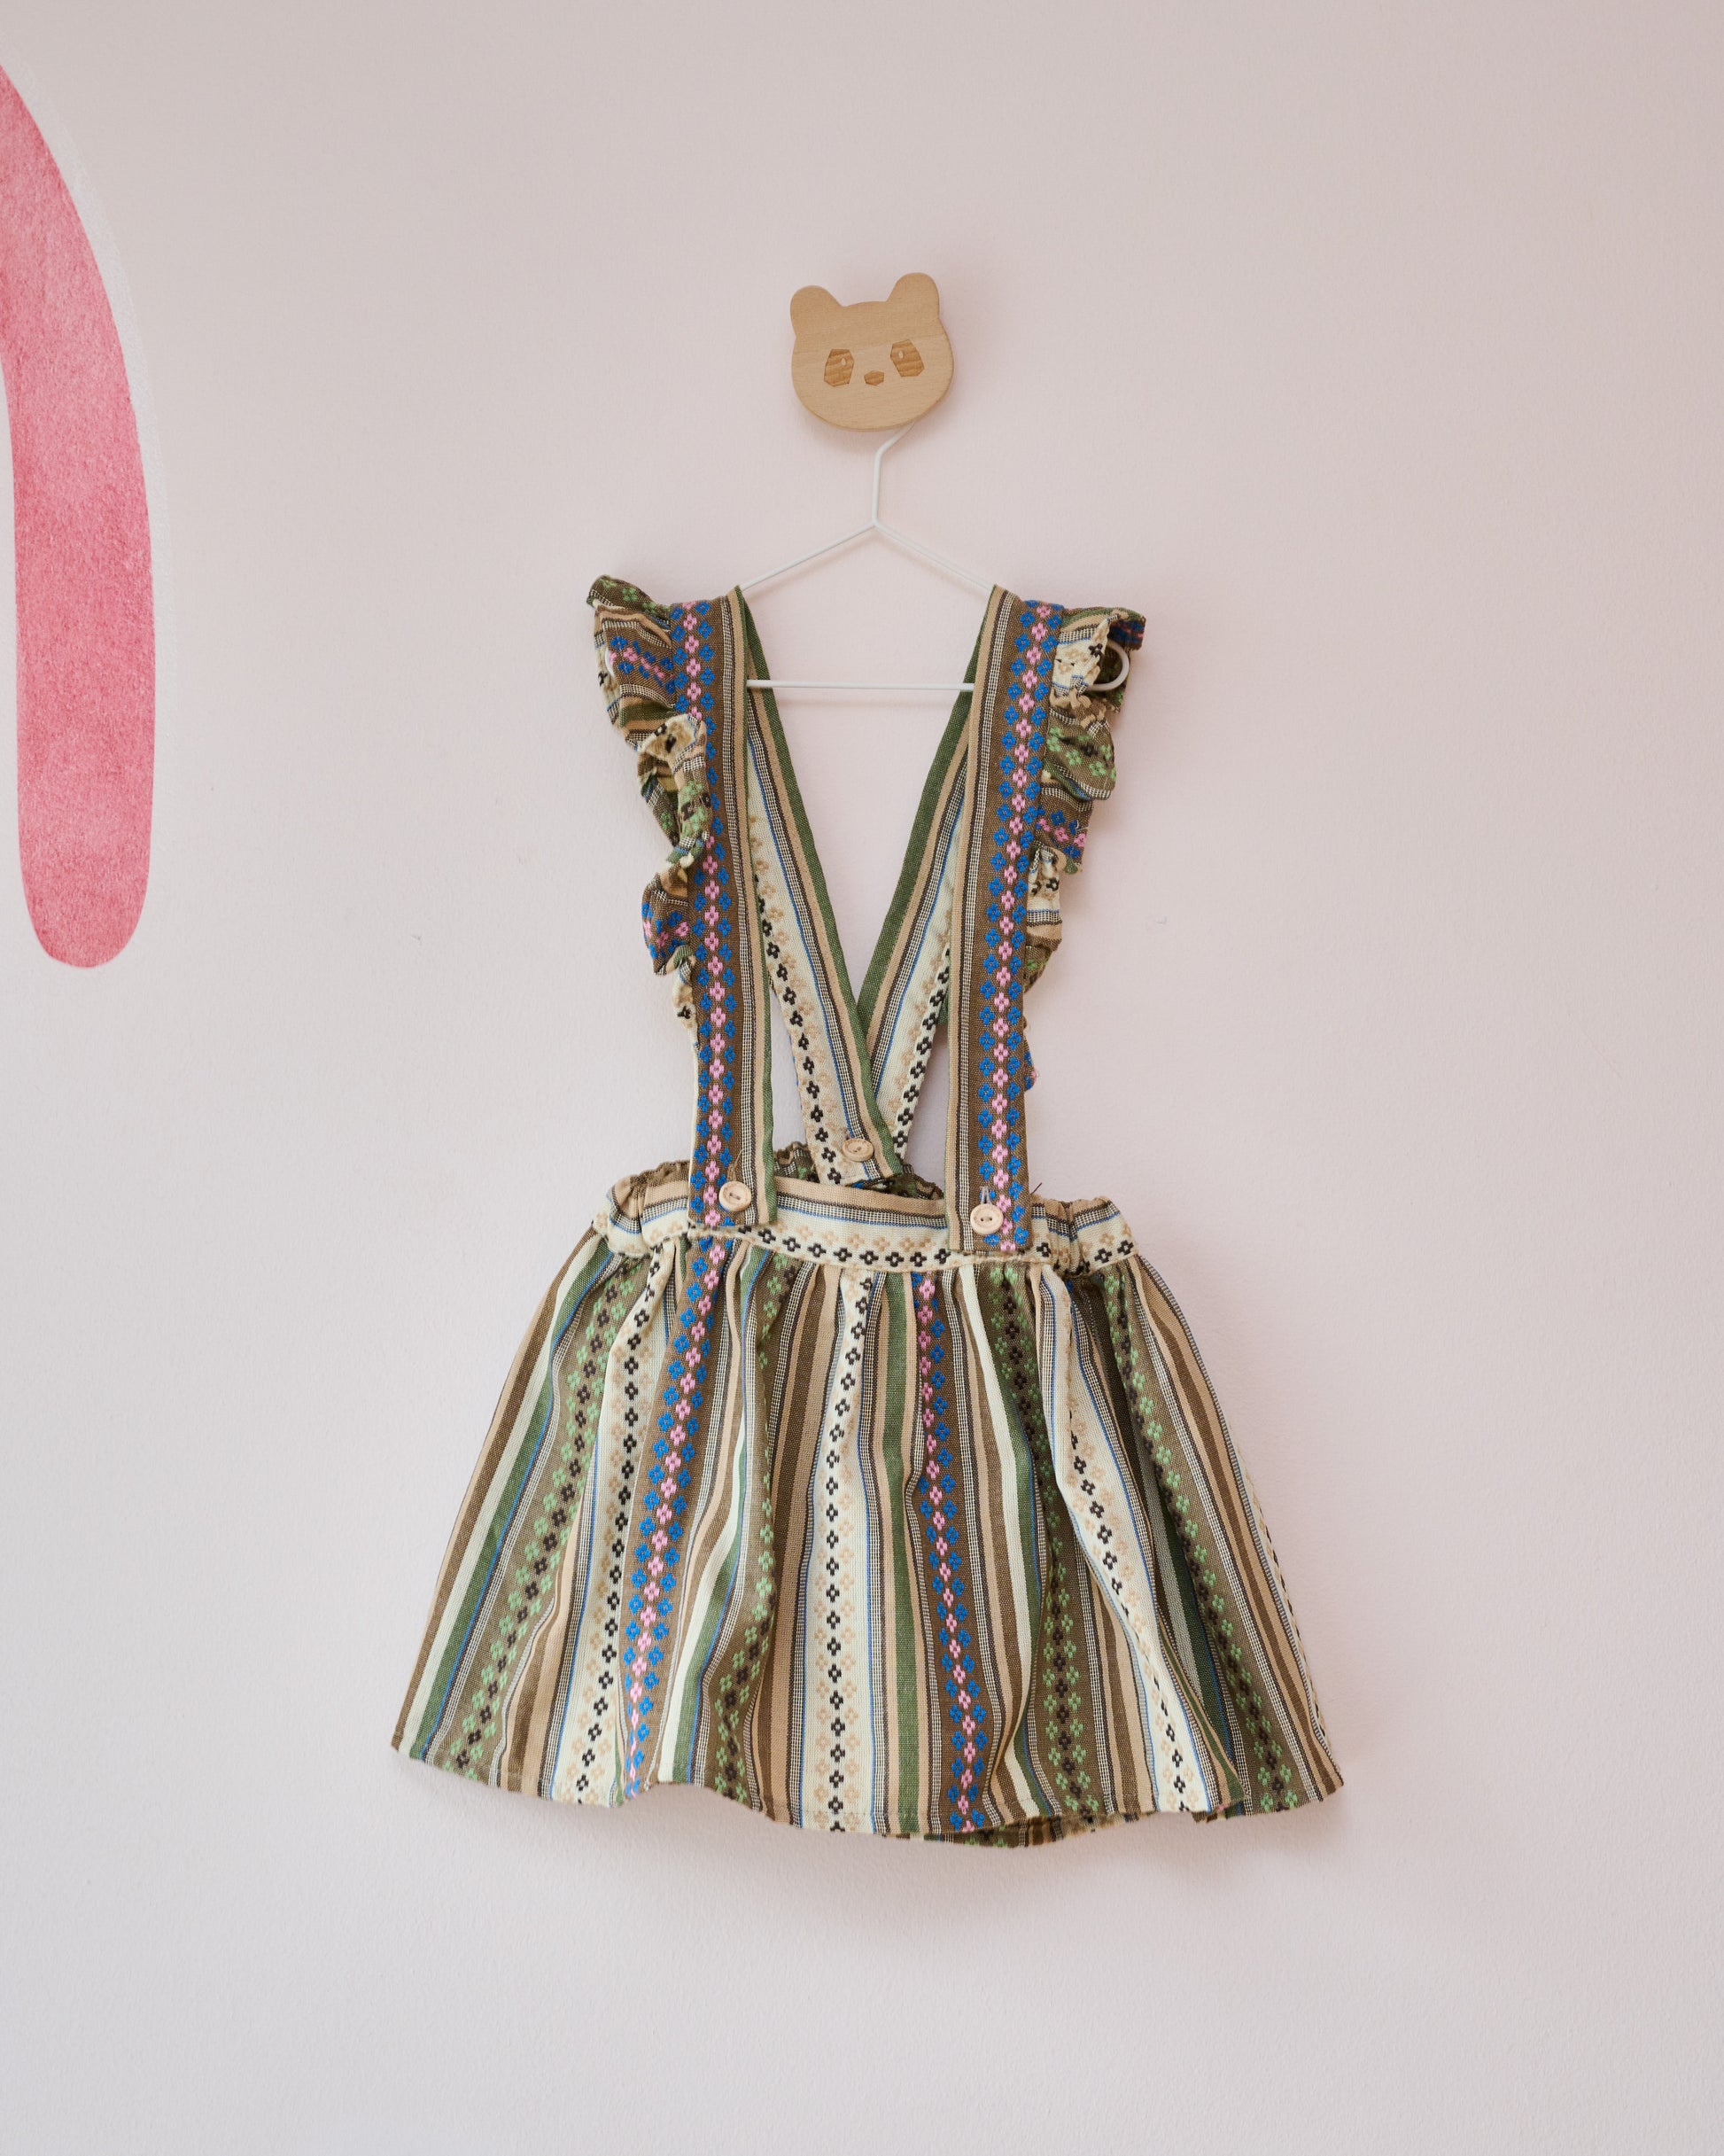 The Magical Forest Dungaree Skirt - CooCootales